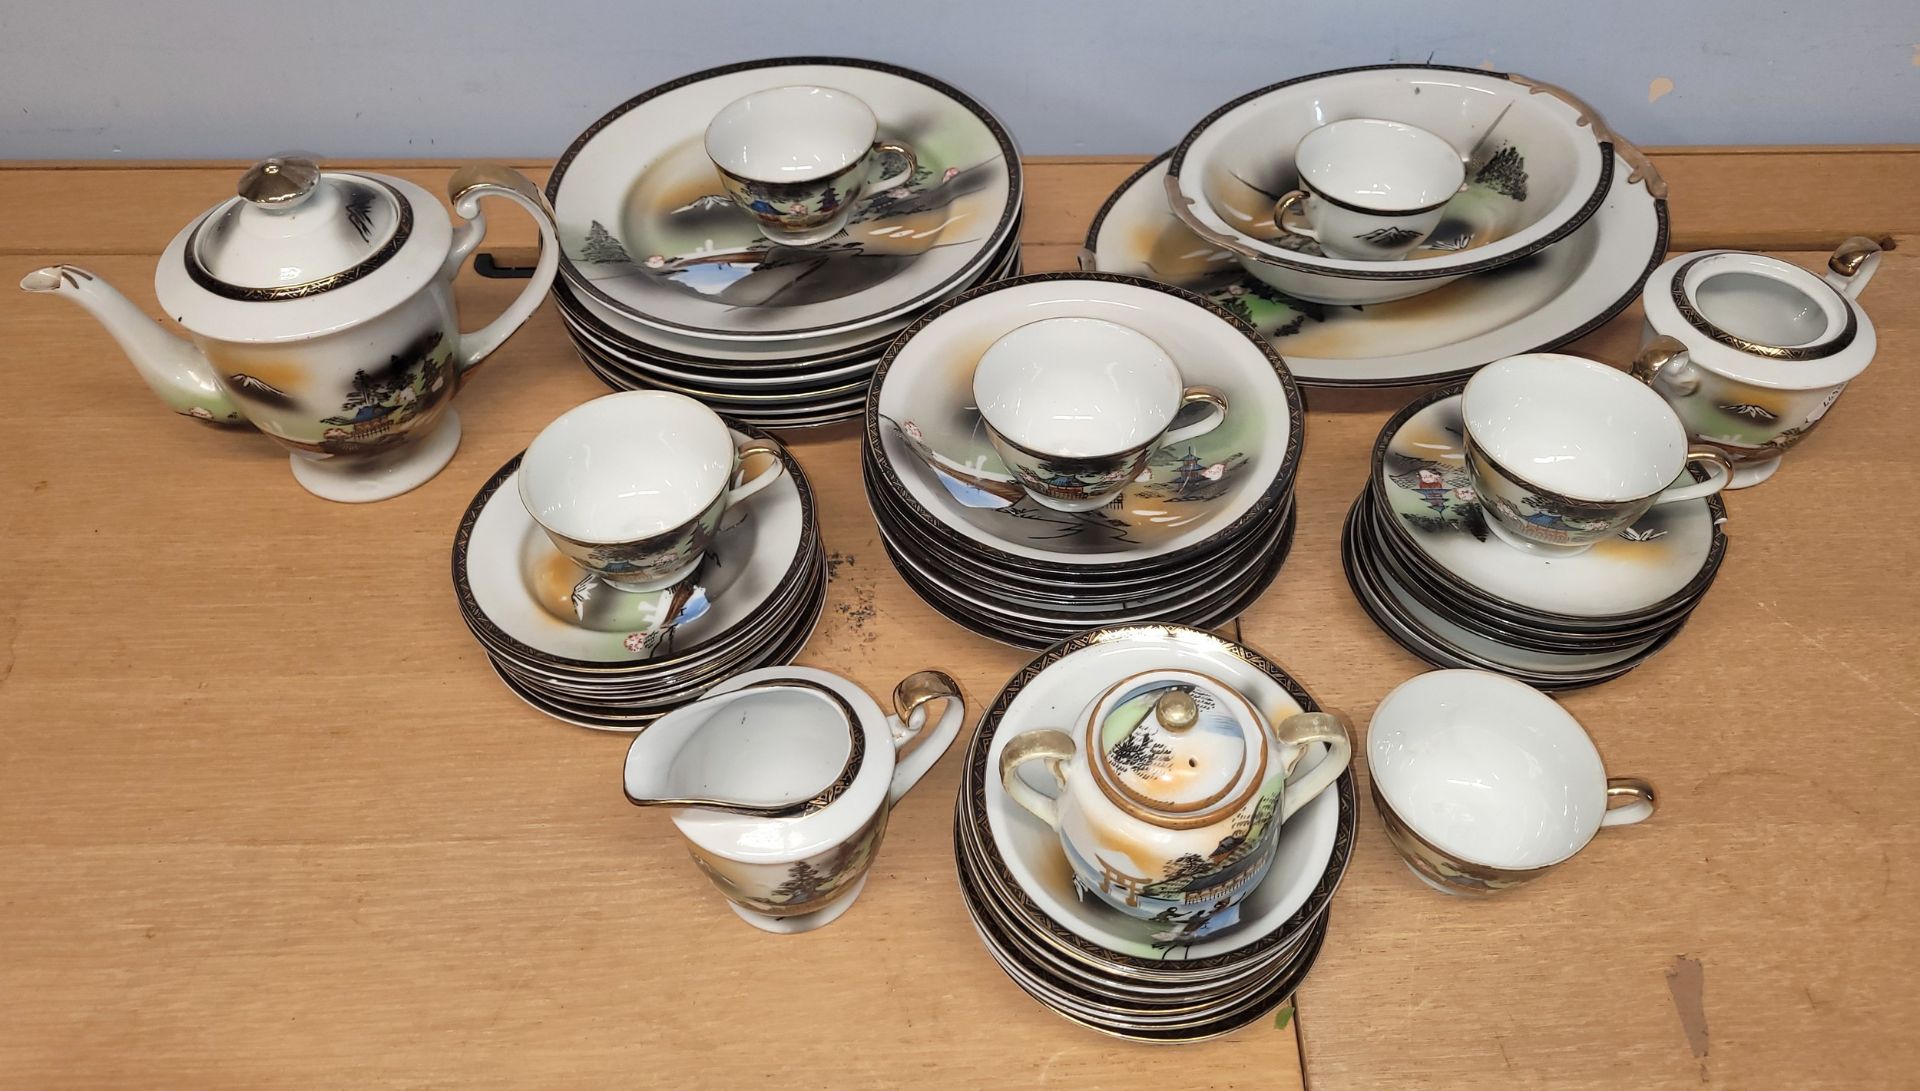 A forty piece Japanese egg porcelain tea/dinner service, circa 1930s, hand painted with landscape